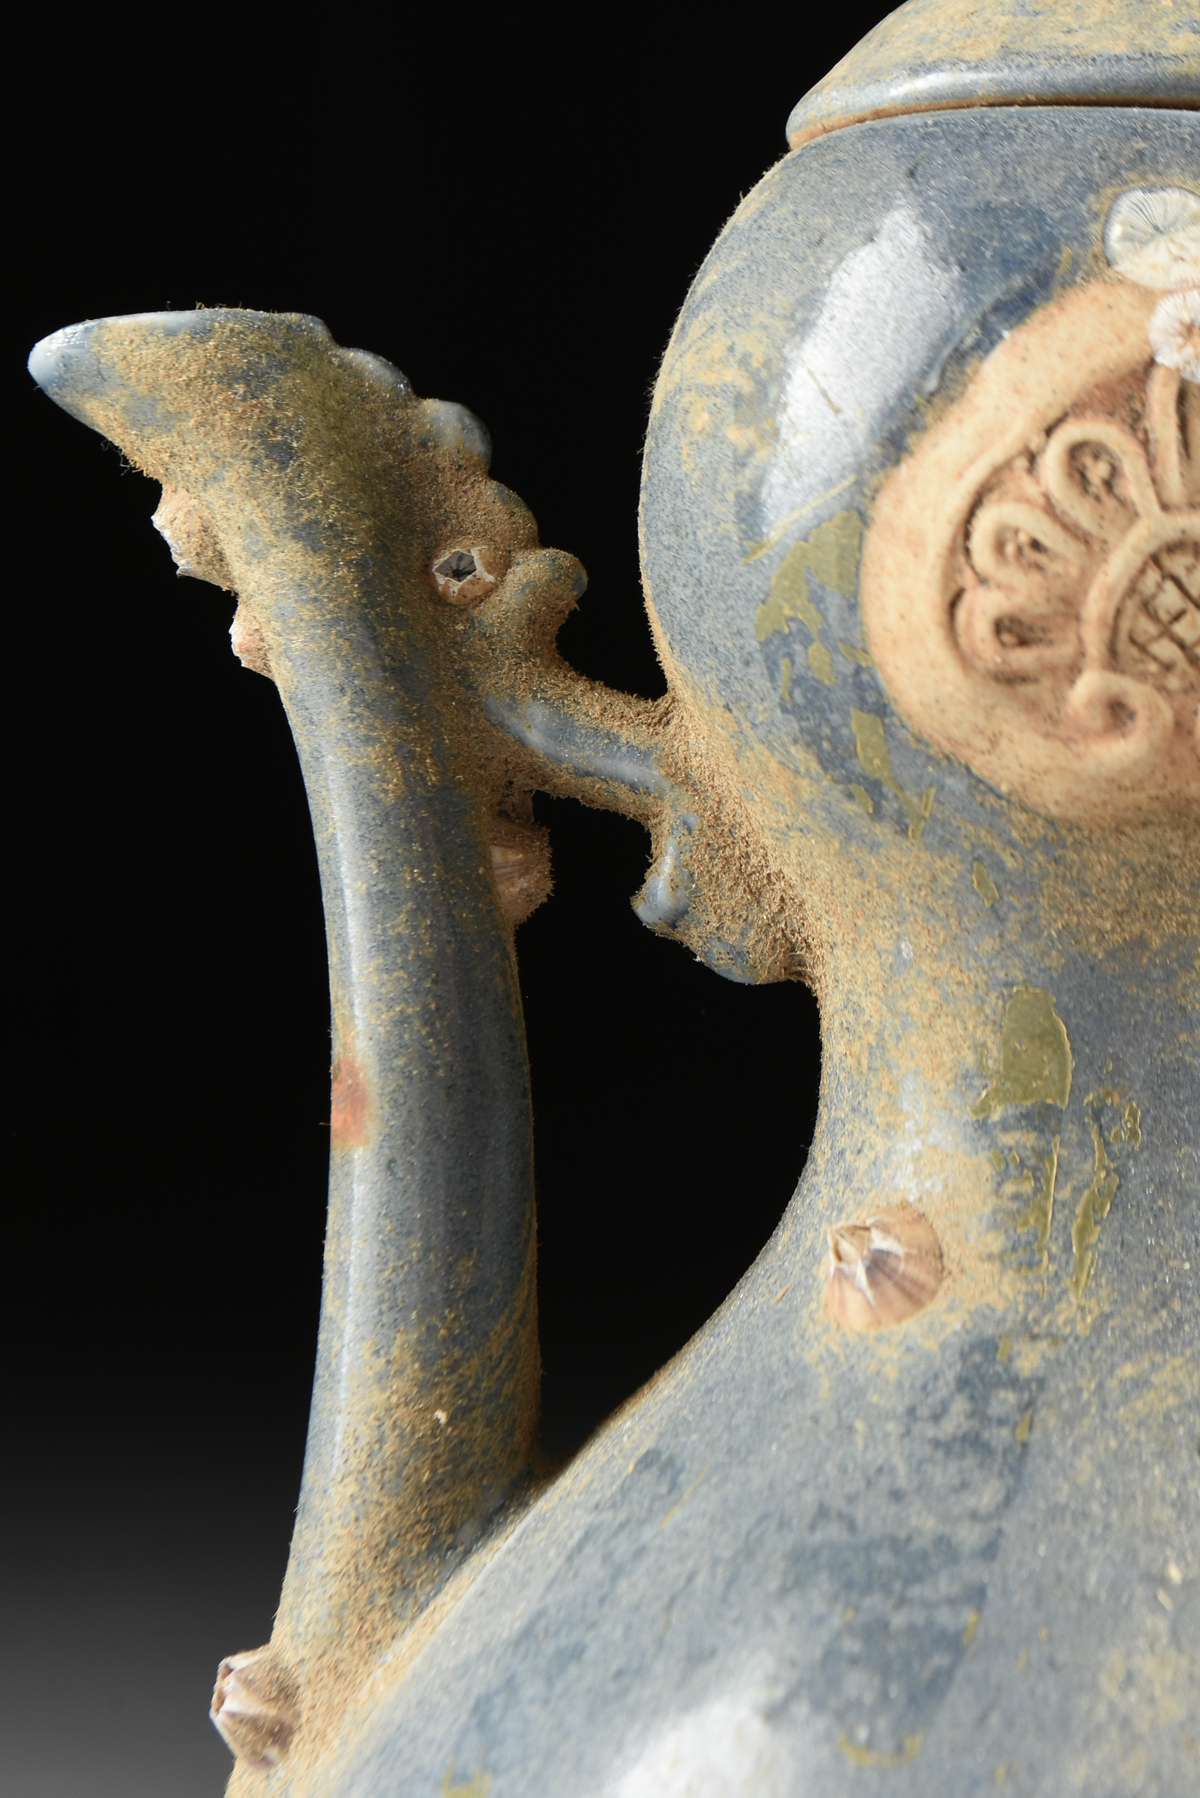 A VIETNAMESE/ANNAMESE BLUE GLAZED DOUBLE GOURD PORCELAIN EWER, SHIPWRECK ARTIFACT, 15TH/16TH - Image 4 of 11